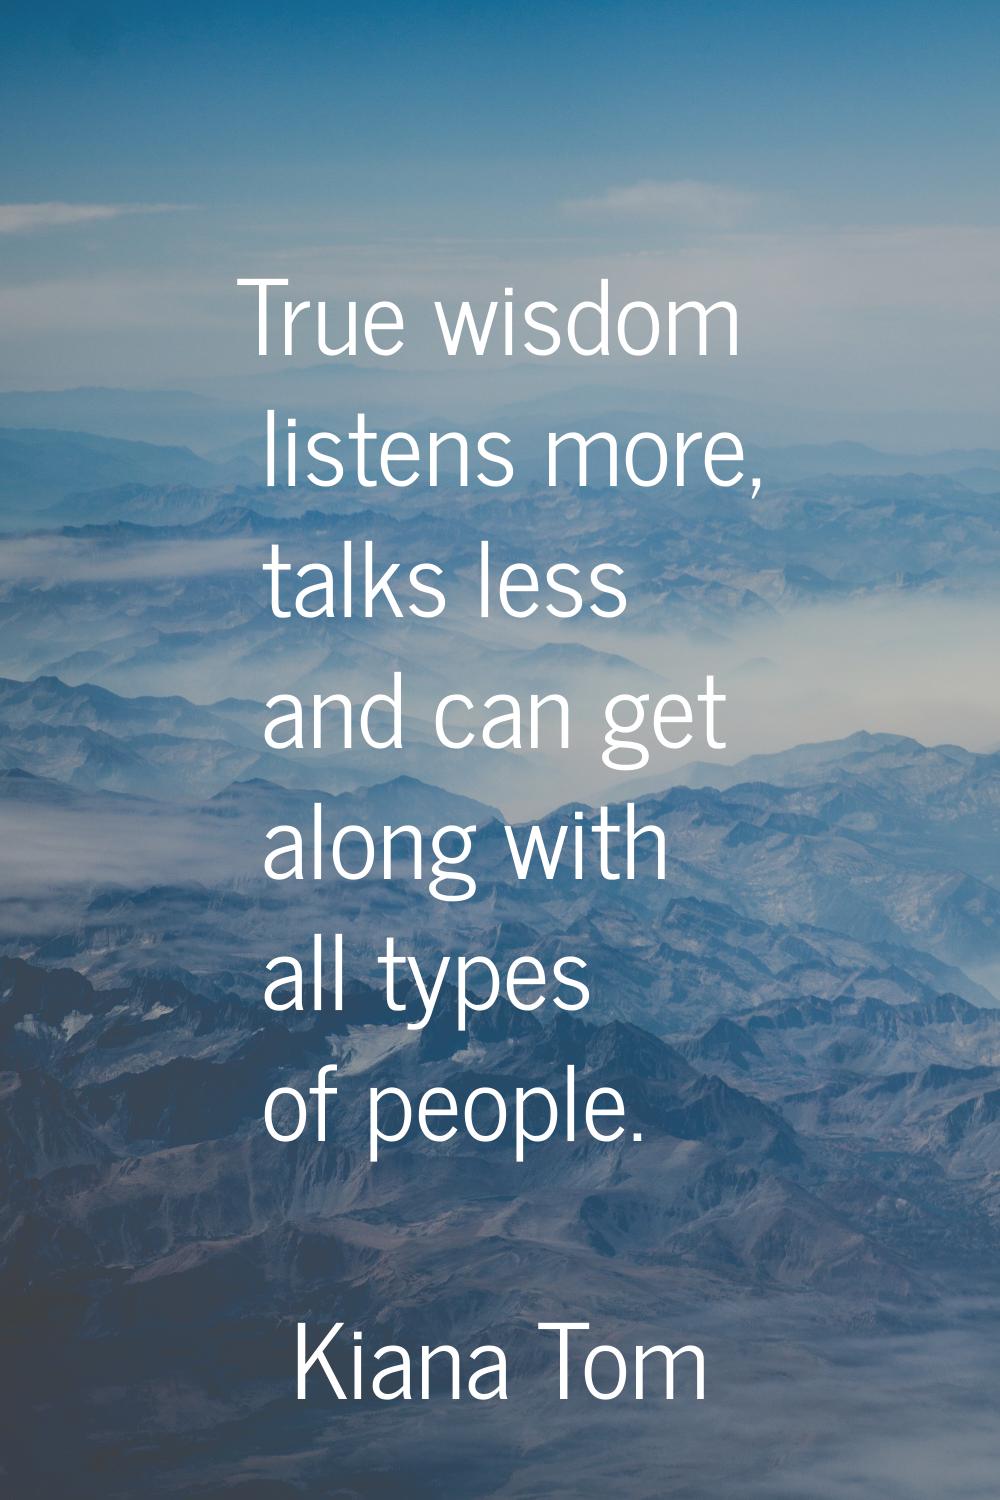 True wisdom listens more, talks less and can get along with all types of people.